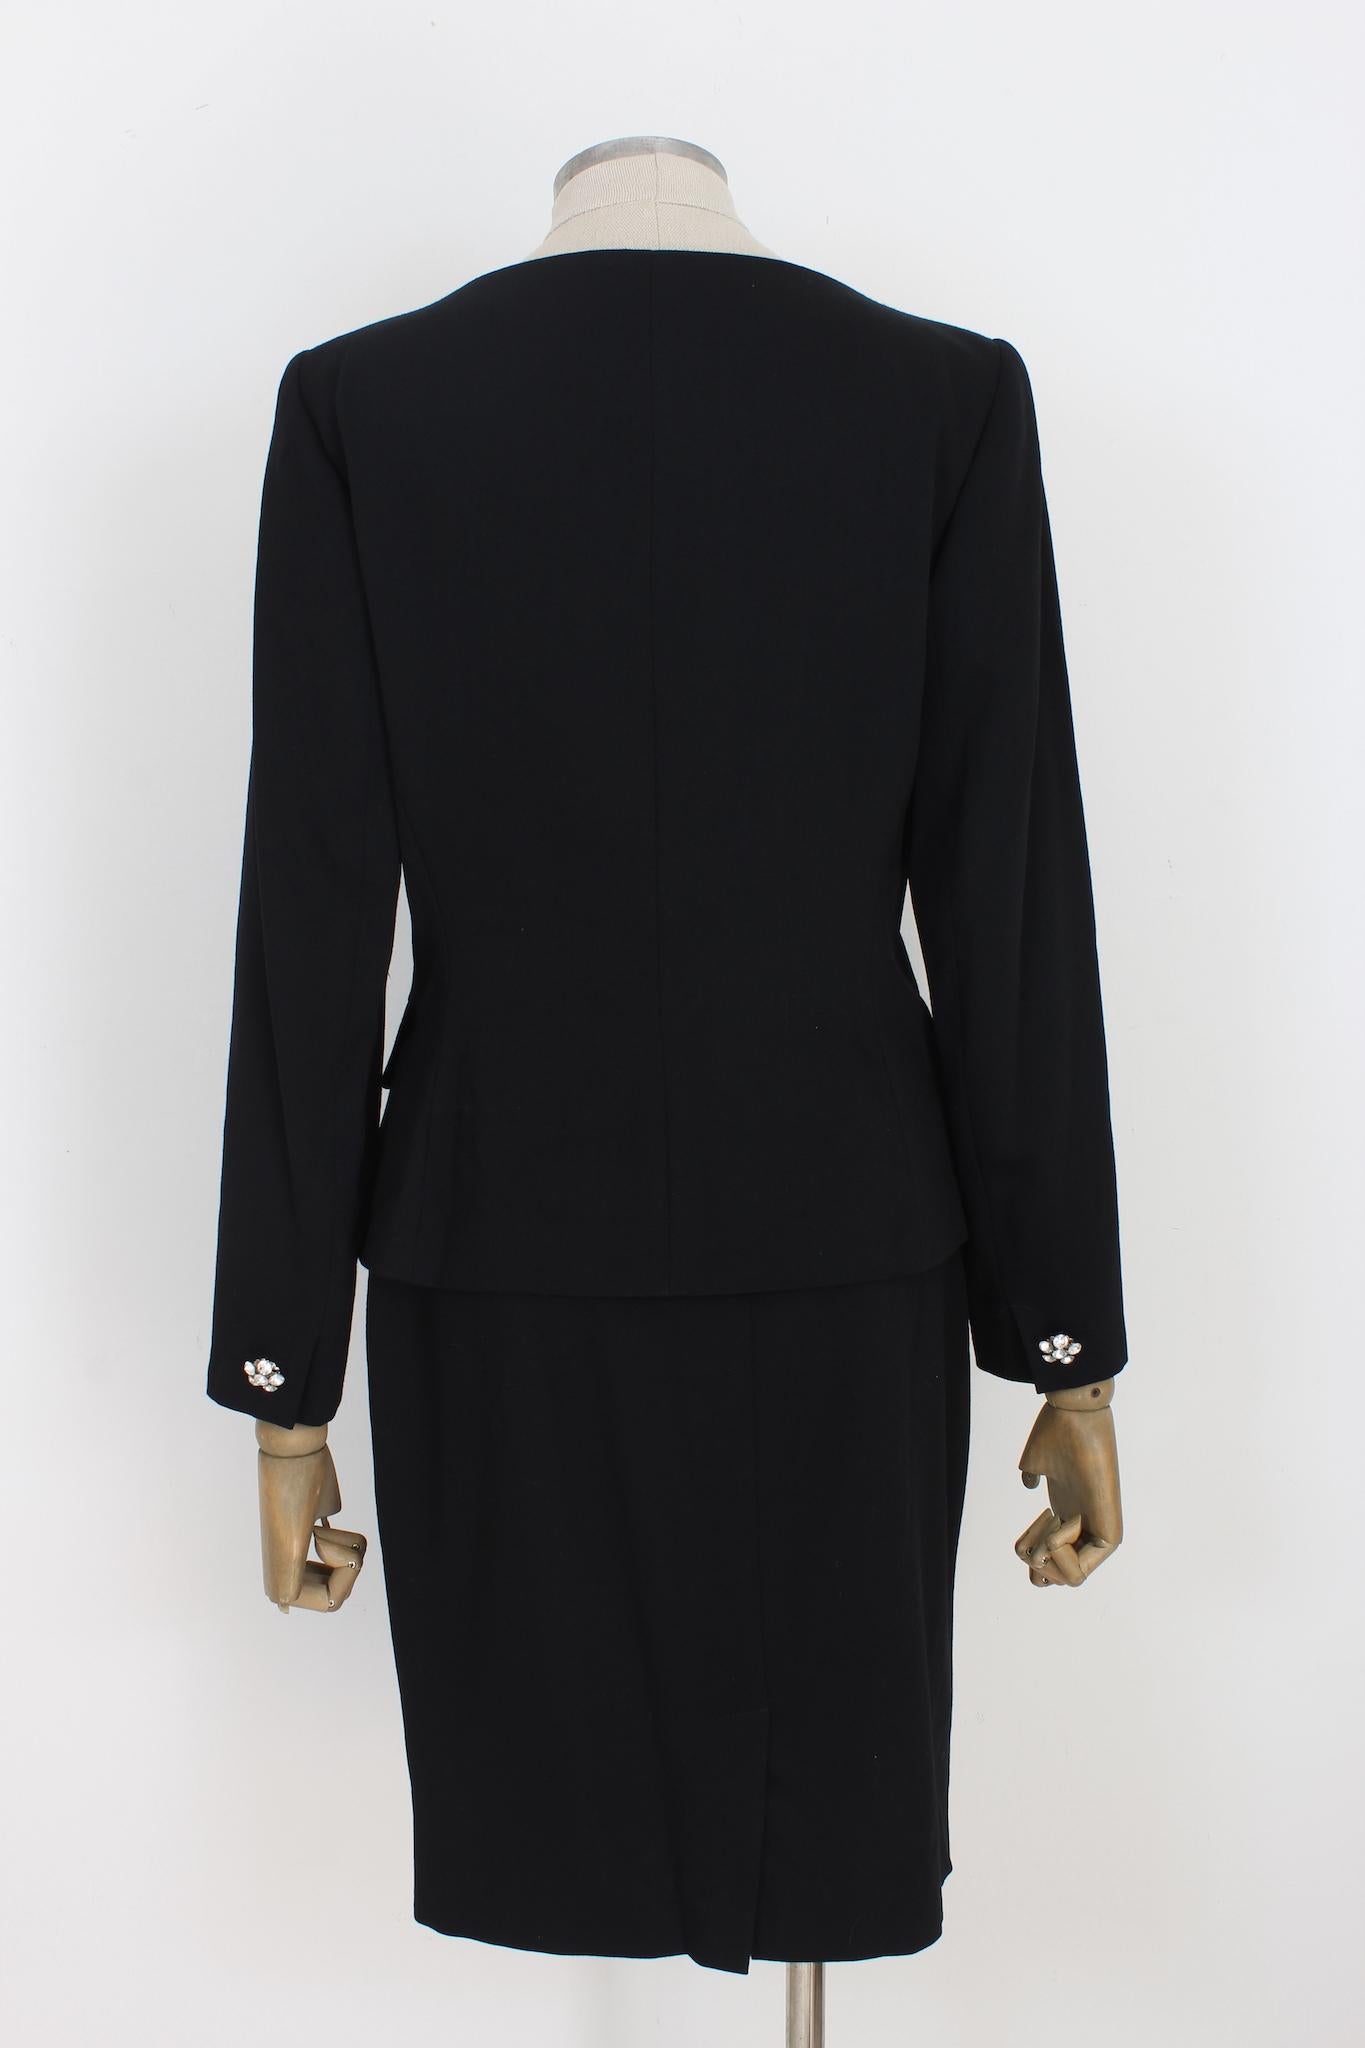 Max Mara Pianoforte elegant 2000s skirt suit. Black colour, 100% wool. Peculiarity in the flower-shaped Swarosky buttons. Made in Italy.

Size: 42 It 8 Us 10 Uk

Shoulder: 42 cm
Bust/Chest: 46 cm
Sleeve: 60 cm
Jacket length: 57 cm
Skirt waist: 35